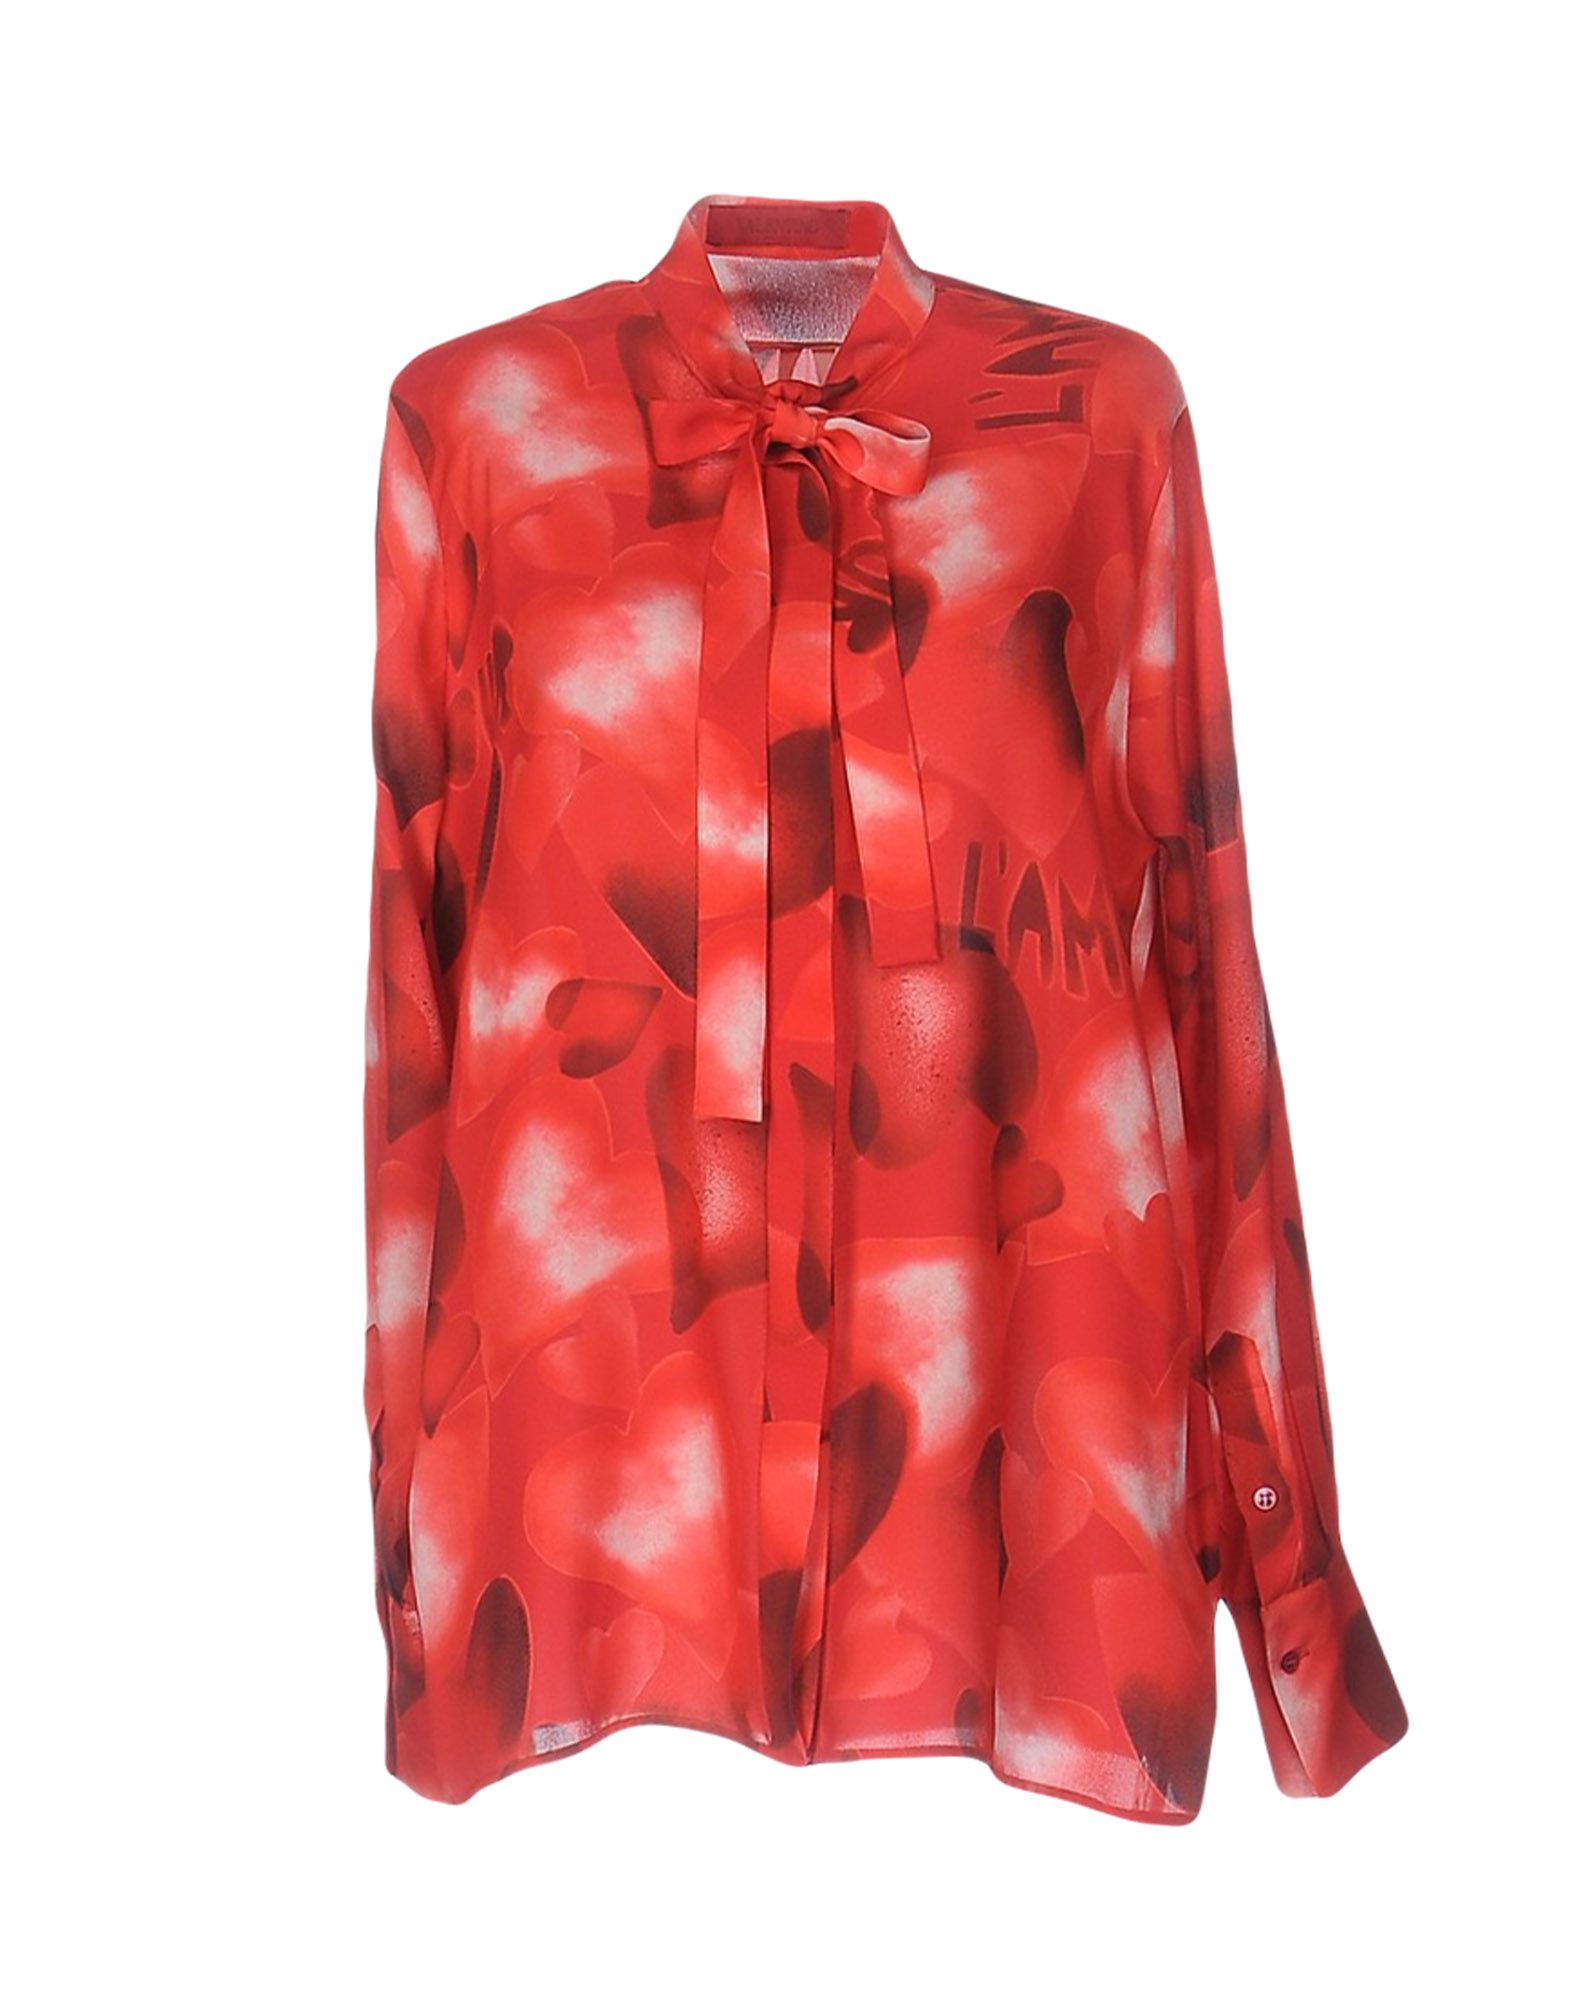 VALENTINO PATTERNED SHIRTS & BLOUSES,38603527TE 5